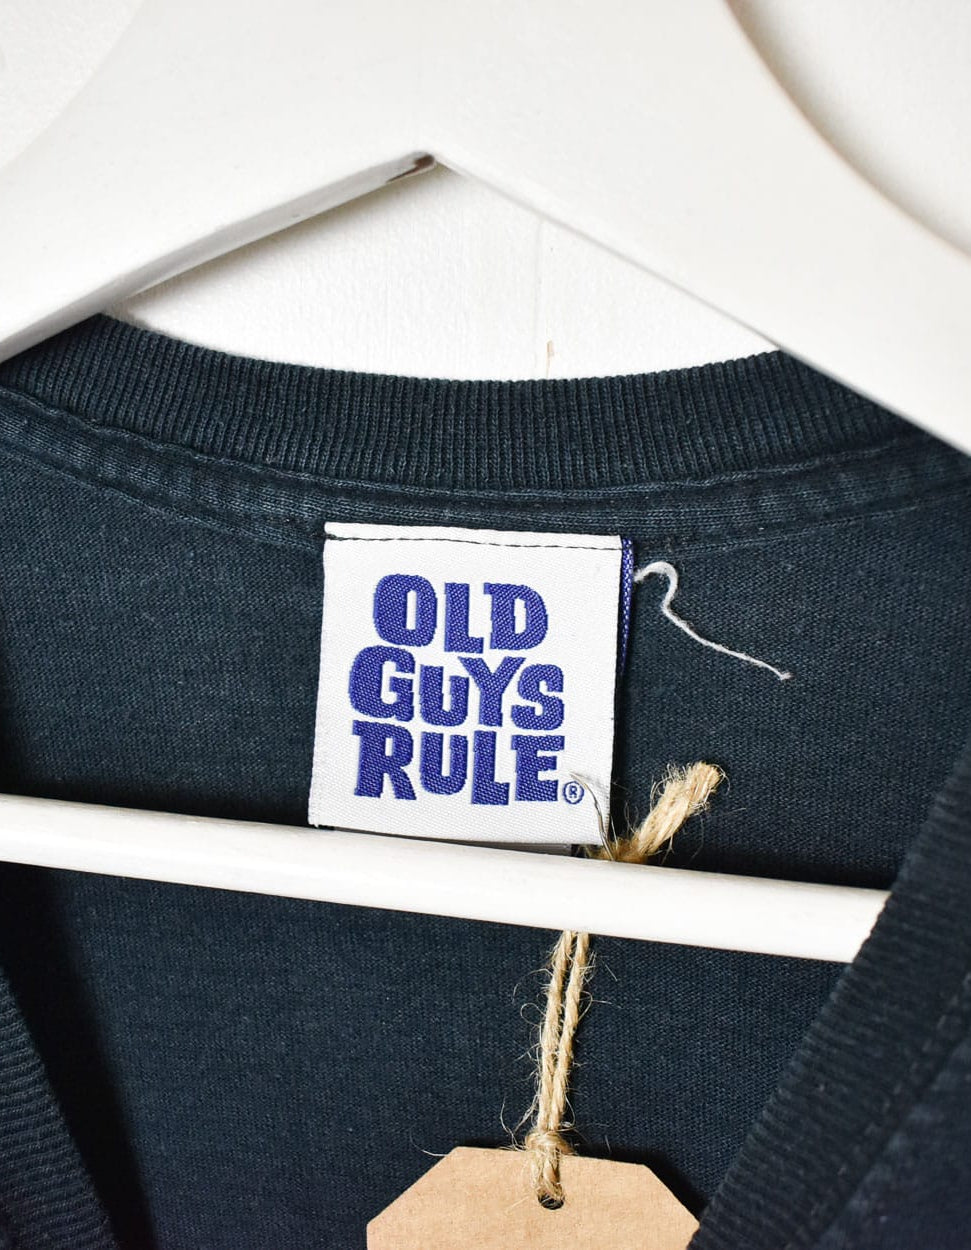 Navy Old Guys Rule Graphic T-Shirt - Large